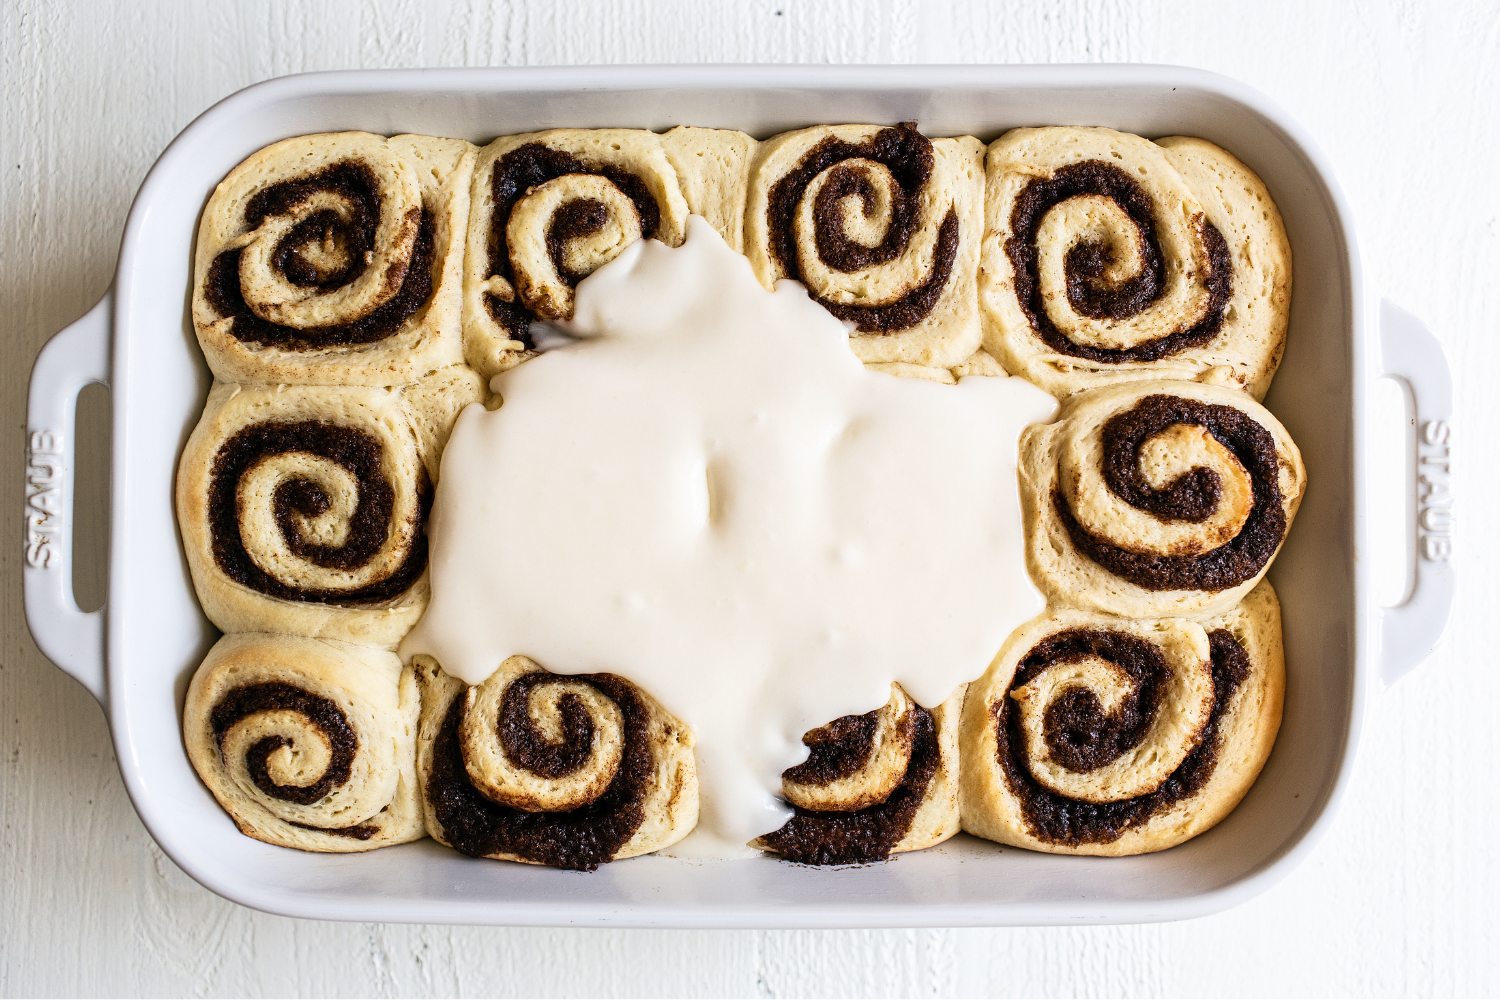 baked cinnamon buns being flooded with flowing white icing.